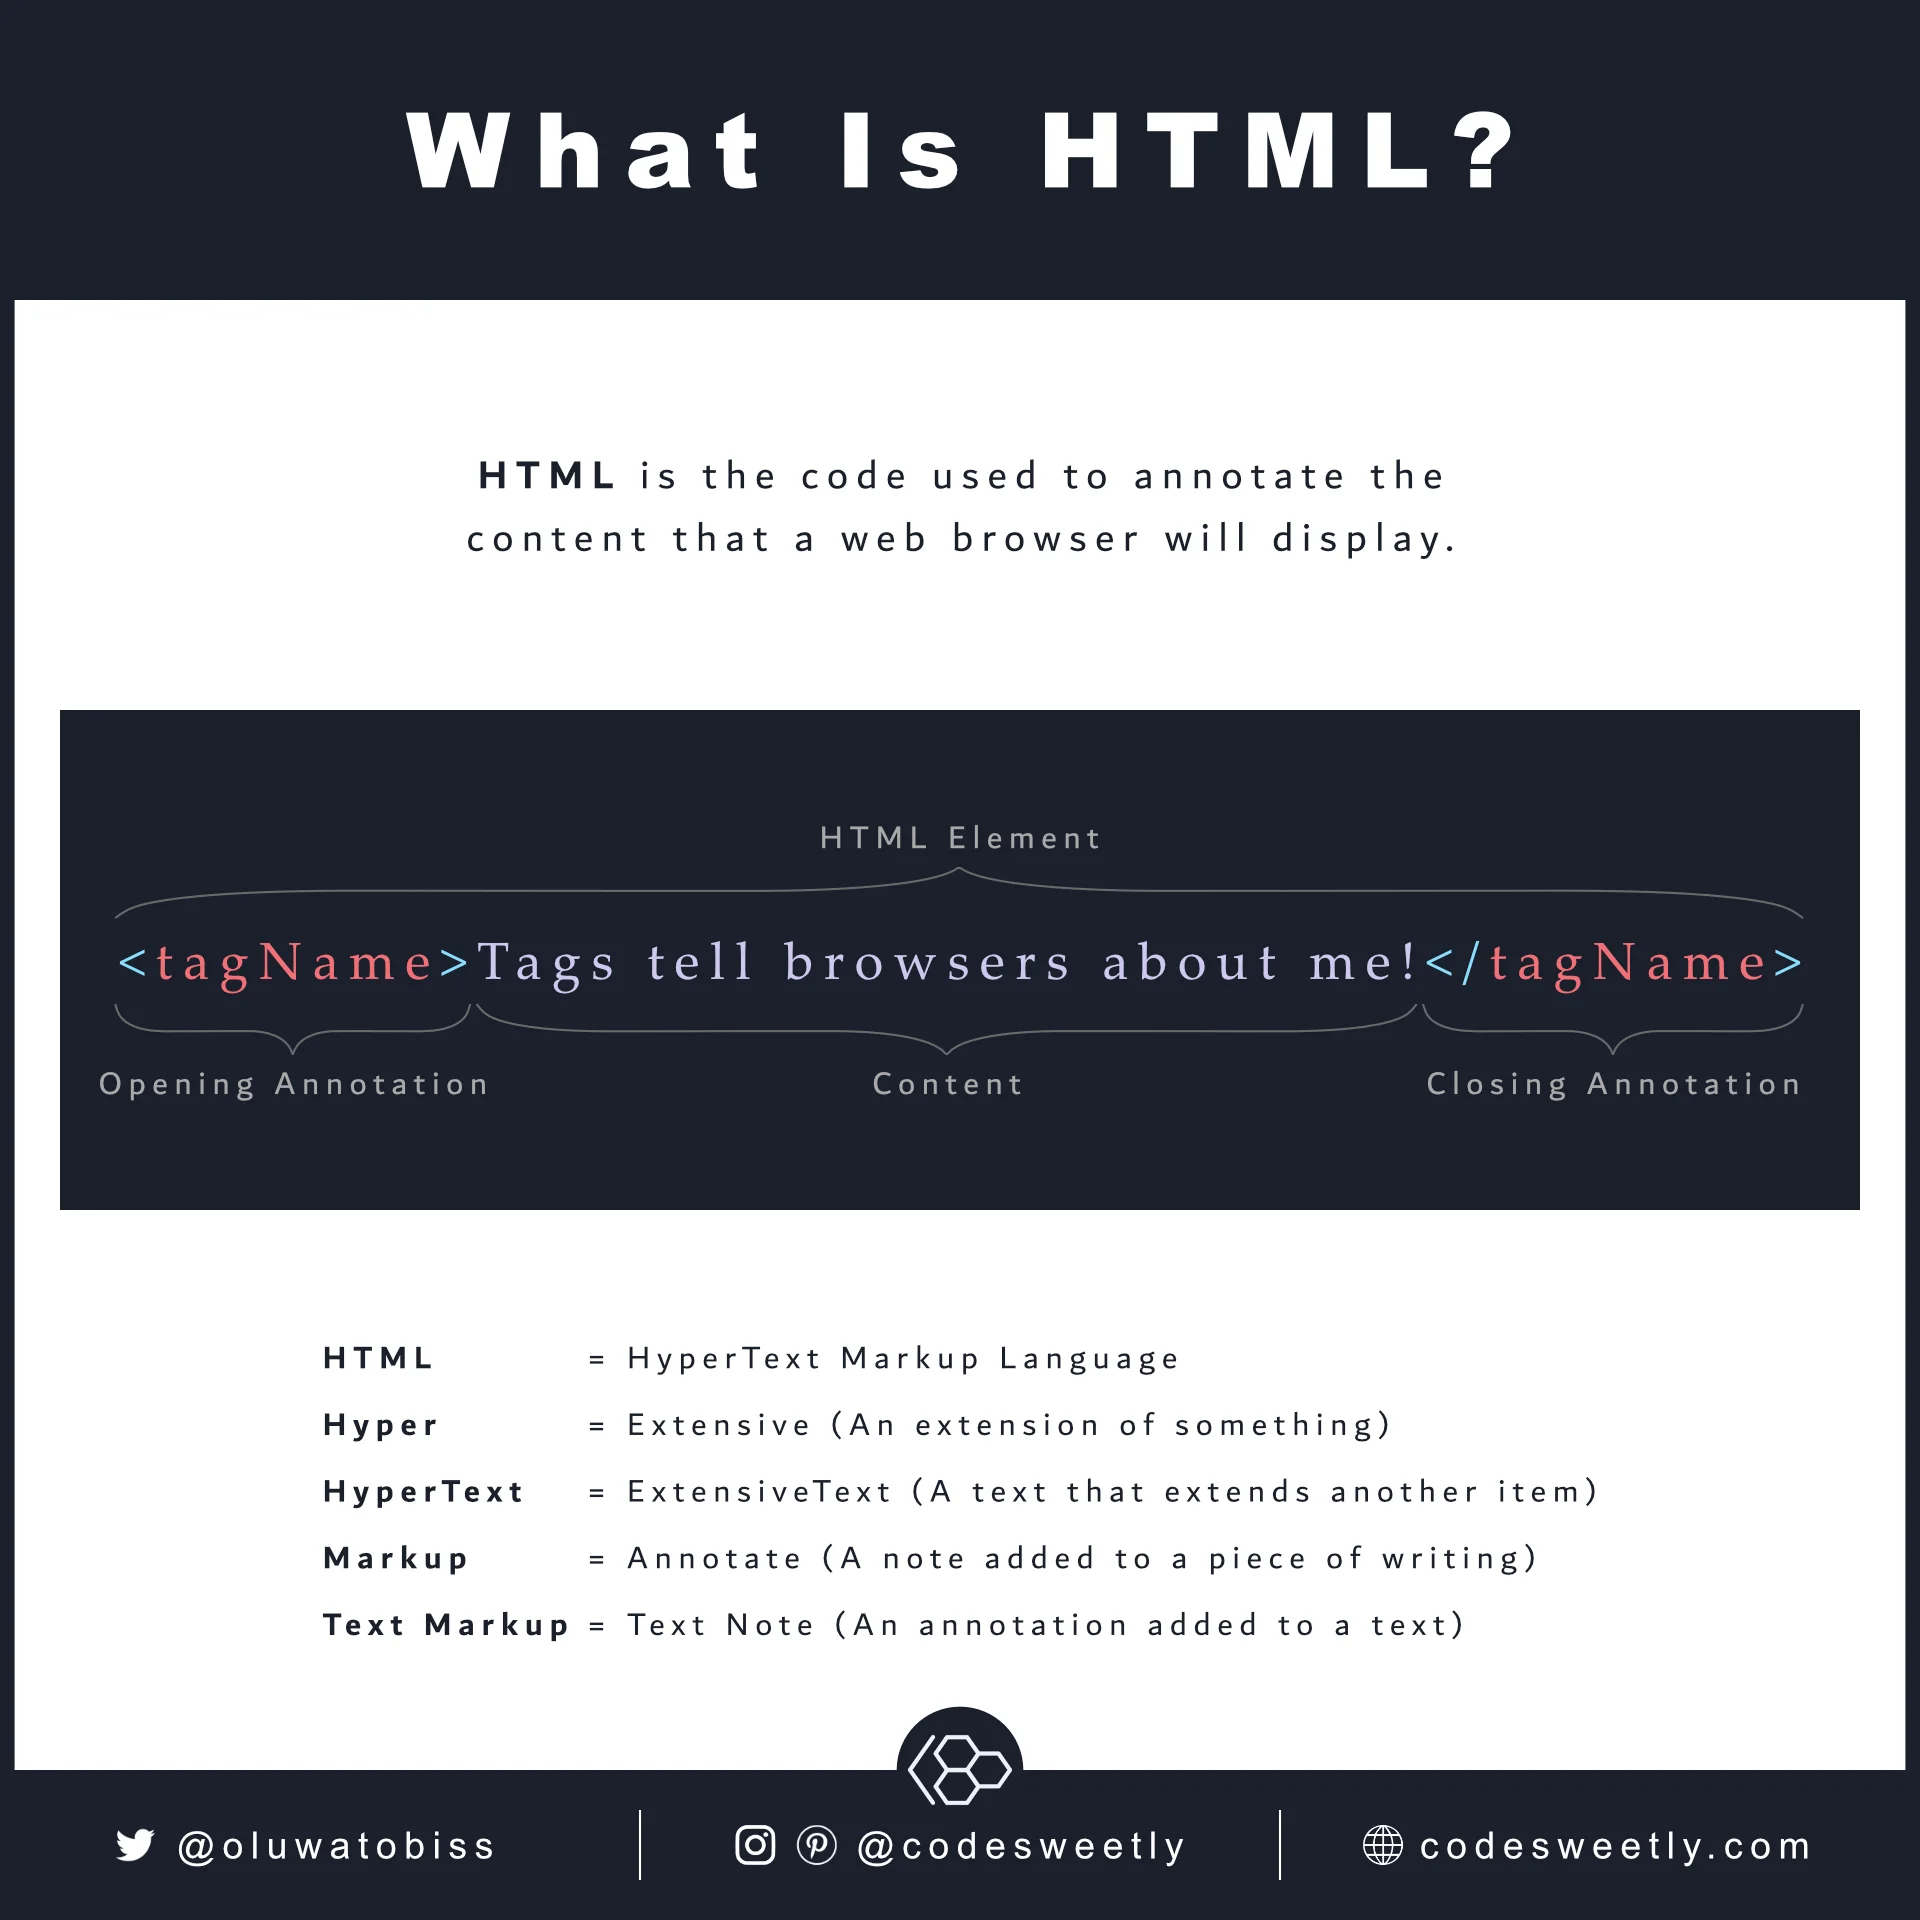 HTML annotates the content a web browser will display